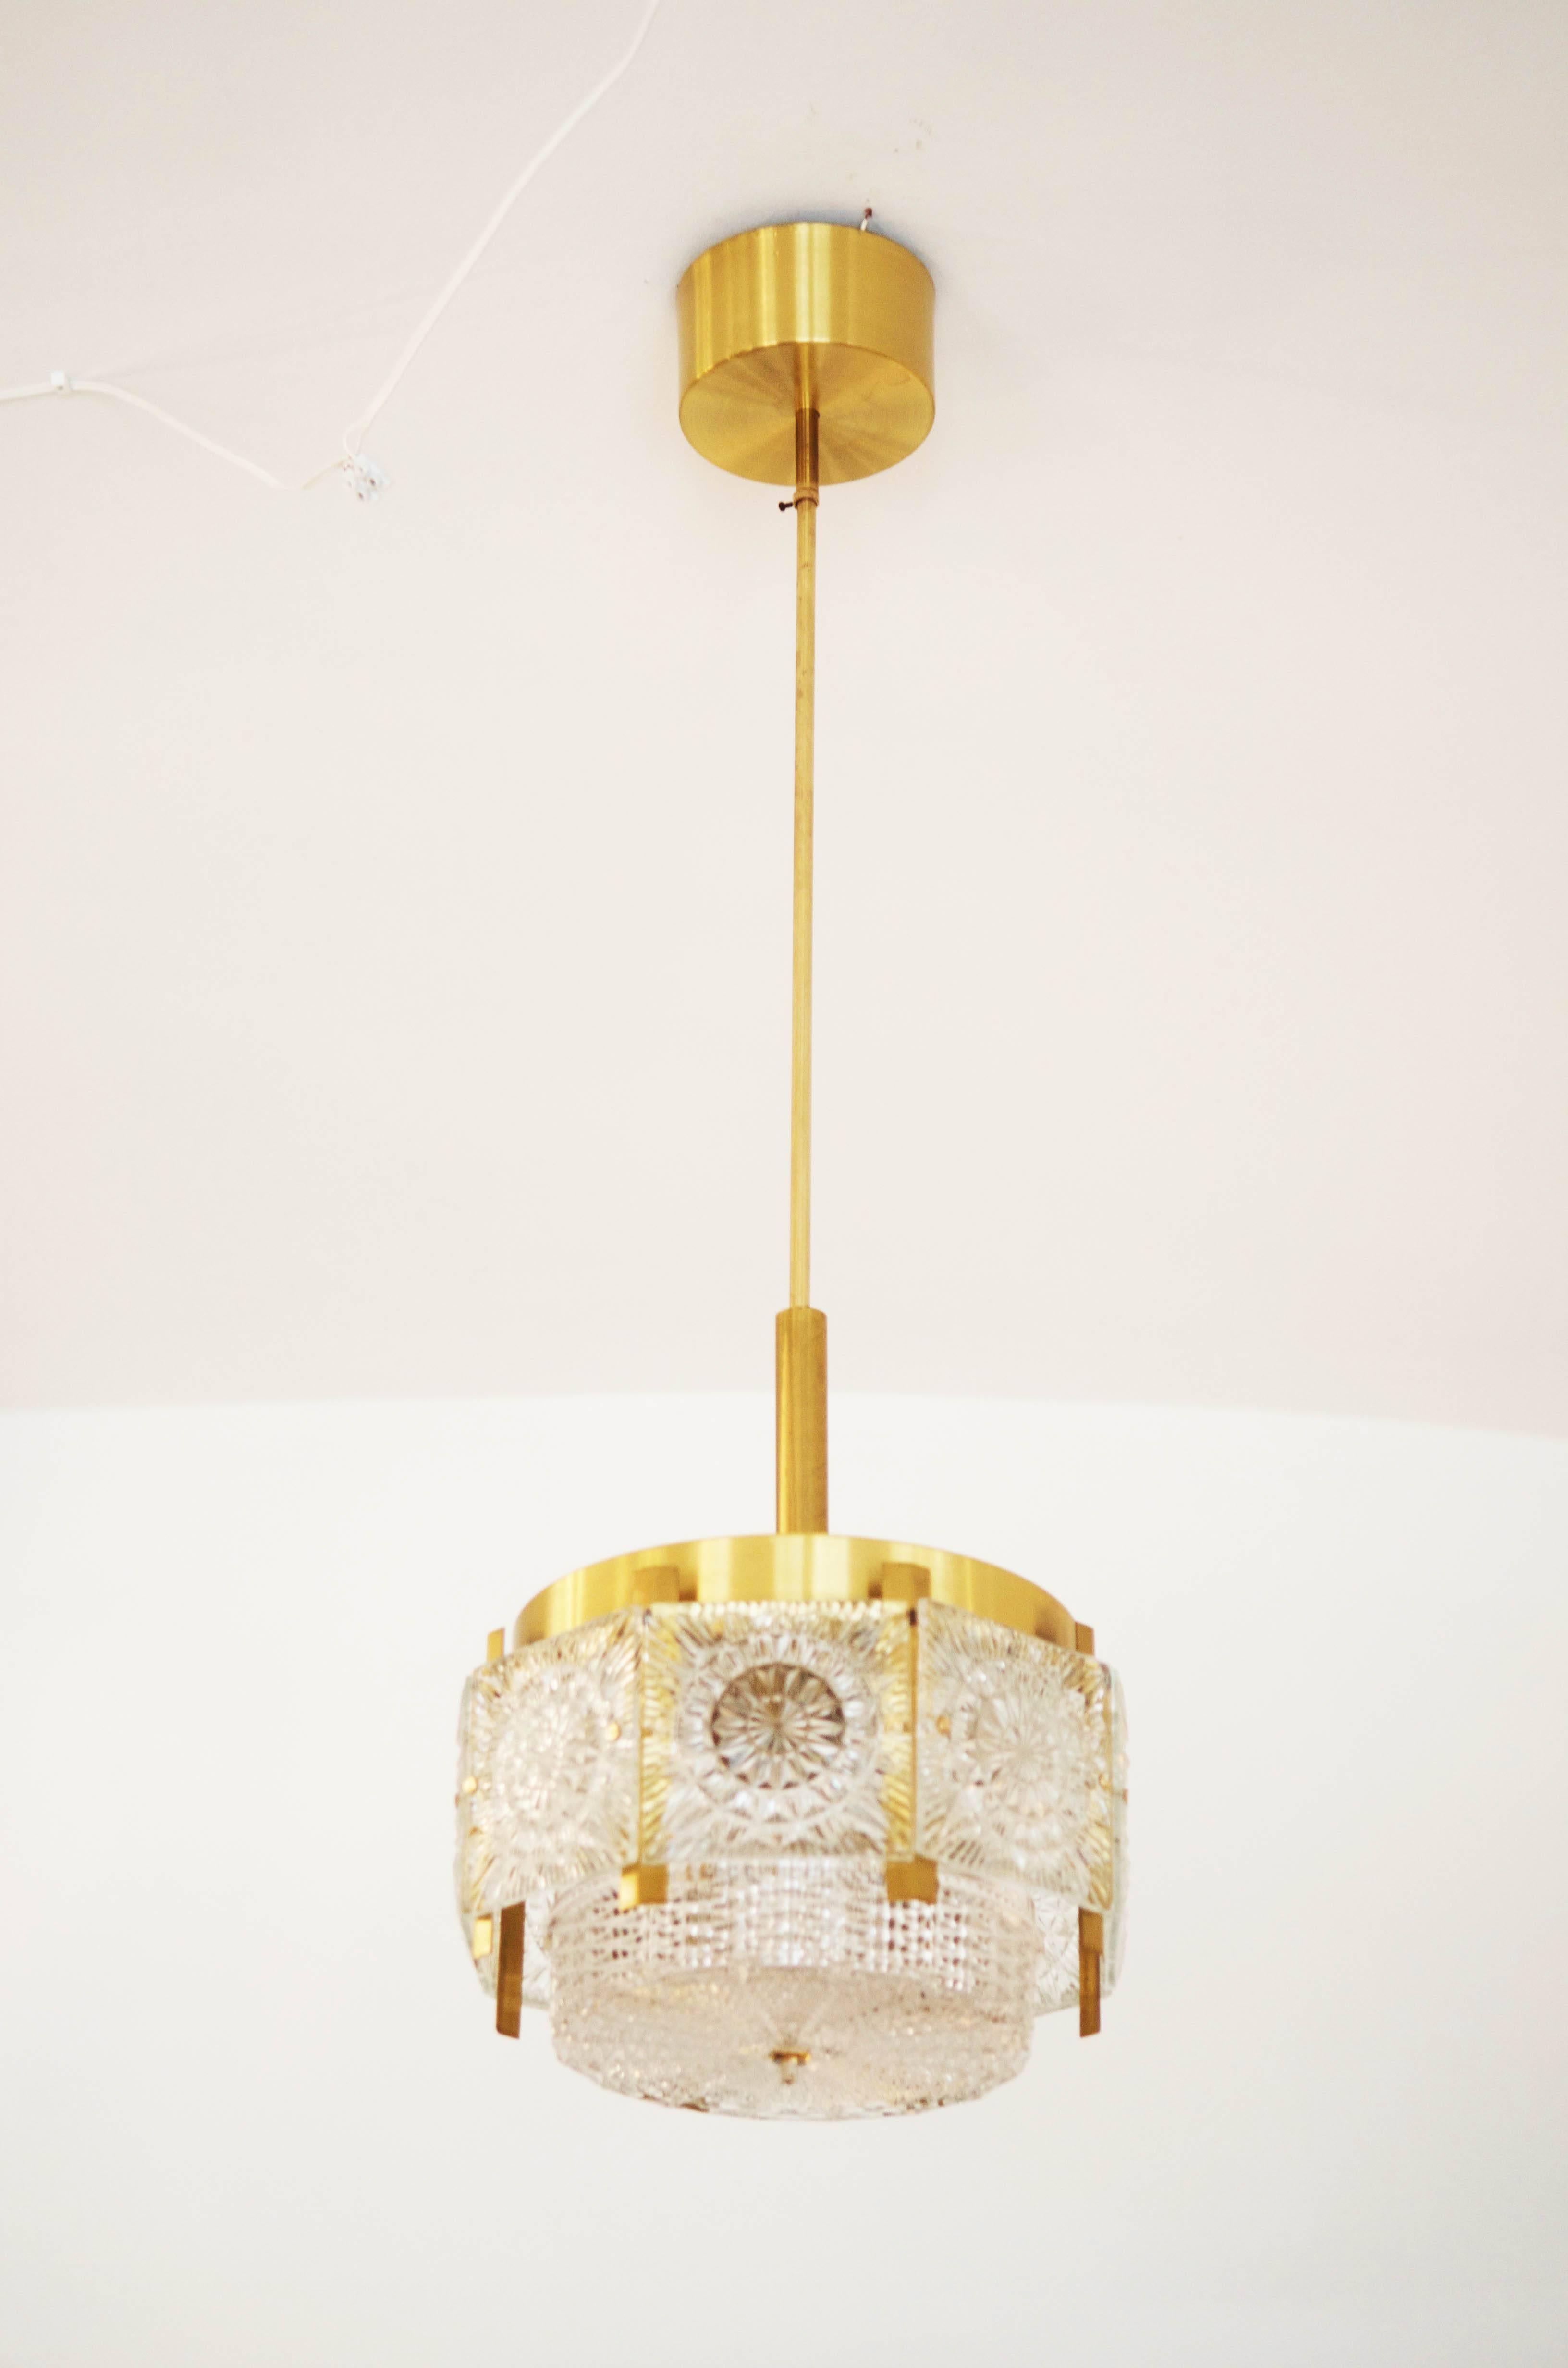 Pressed Beautiful Mid-Century Brass Chandelier For Sale